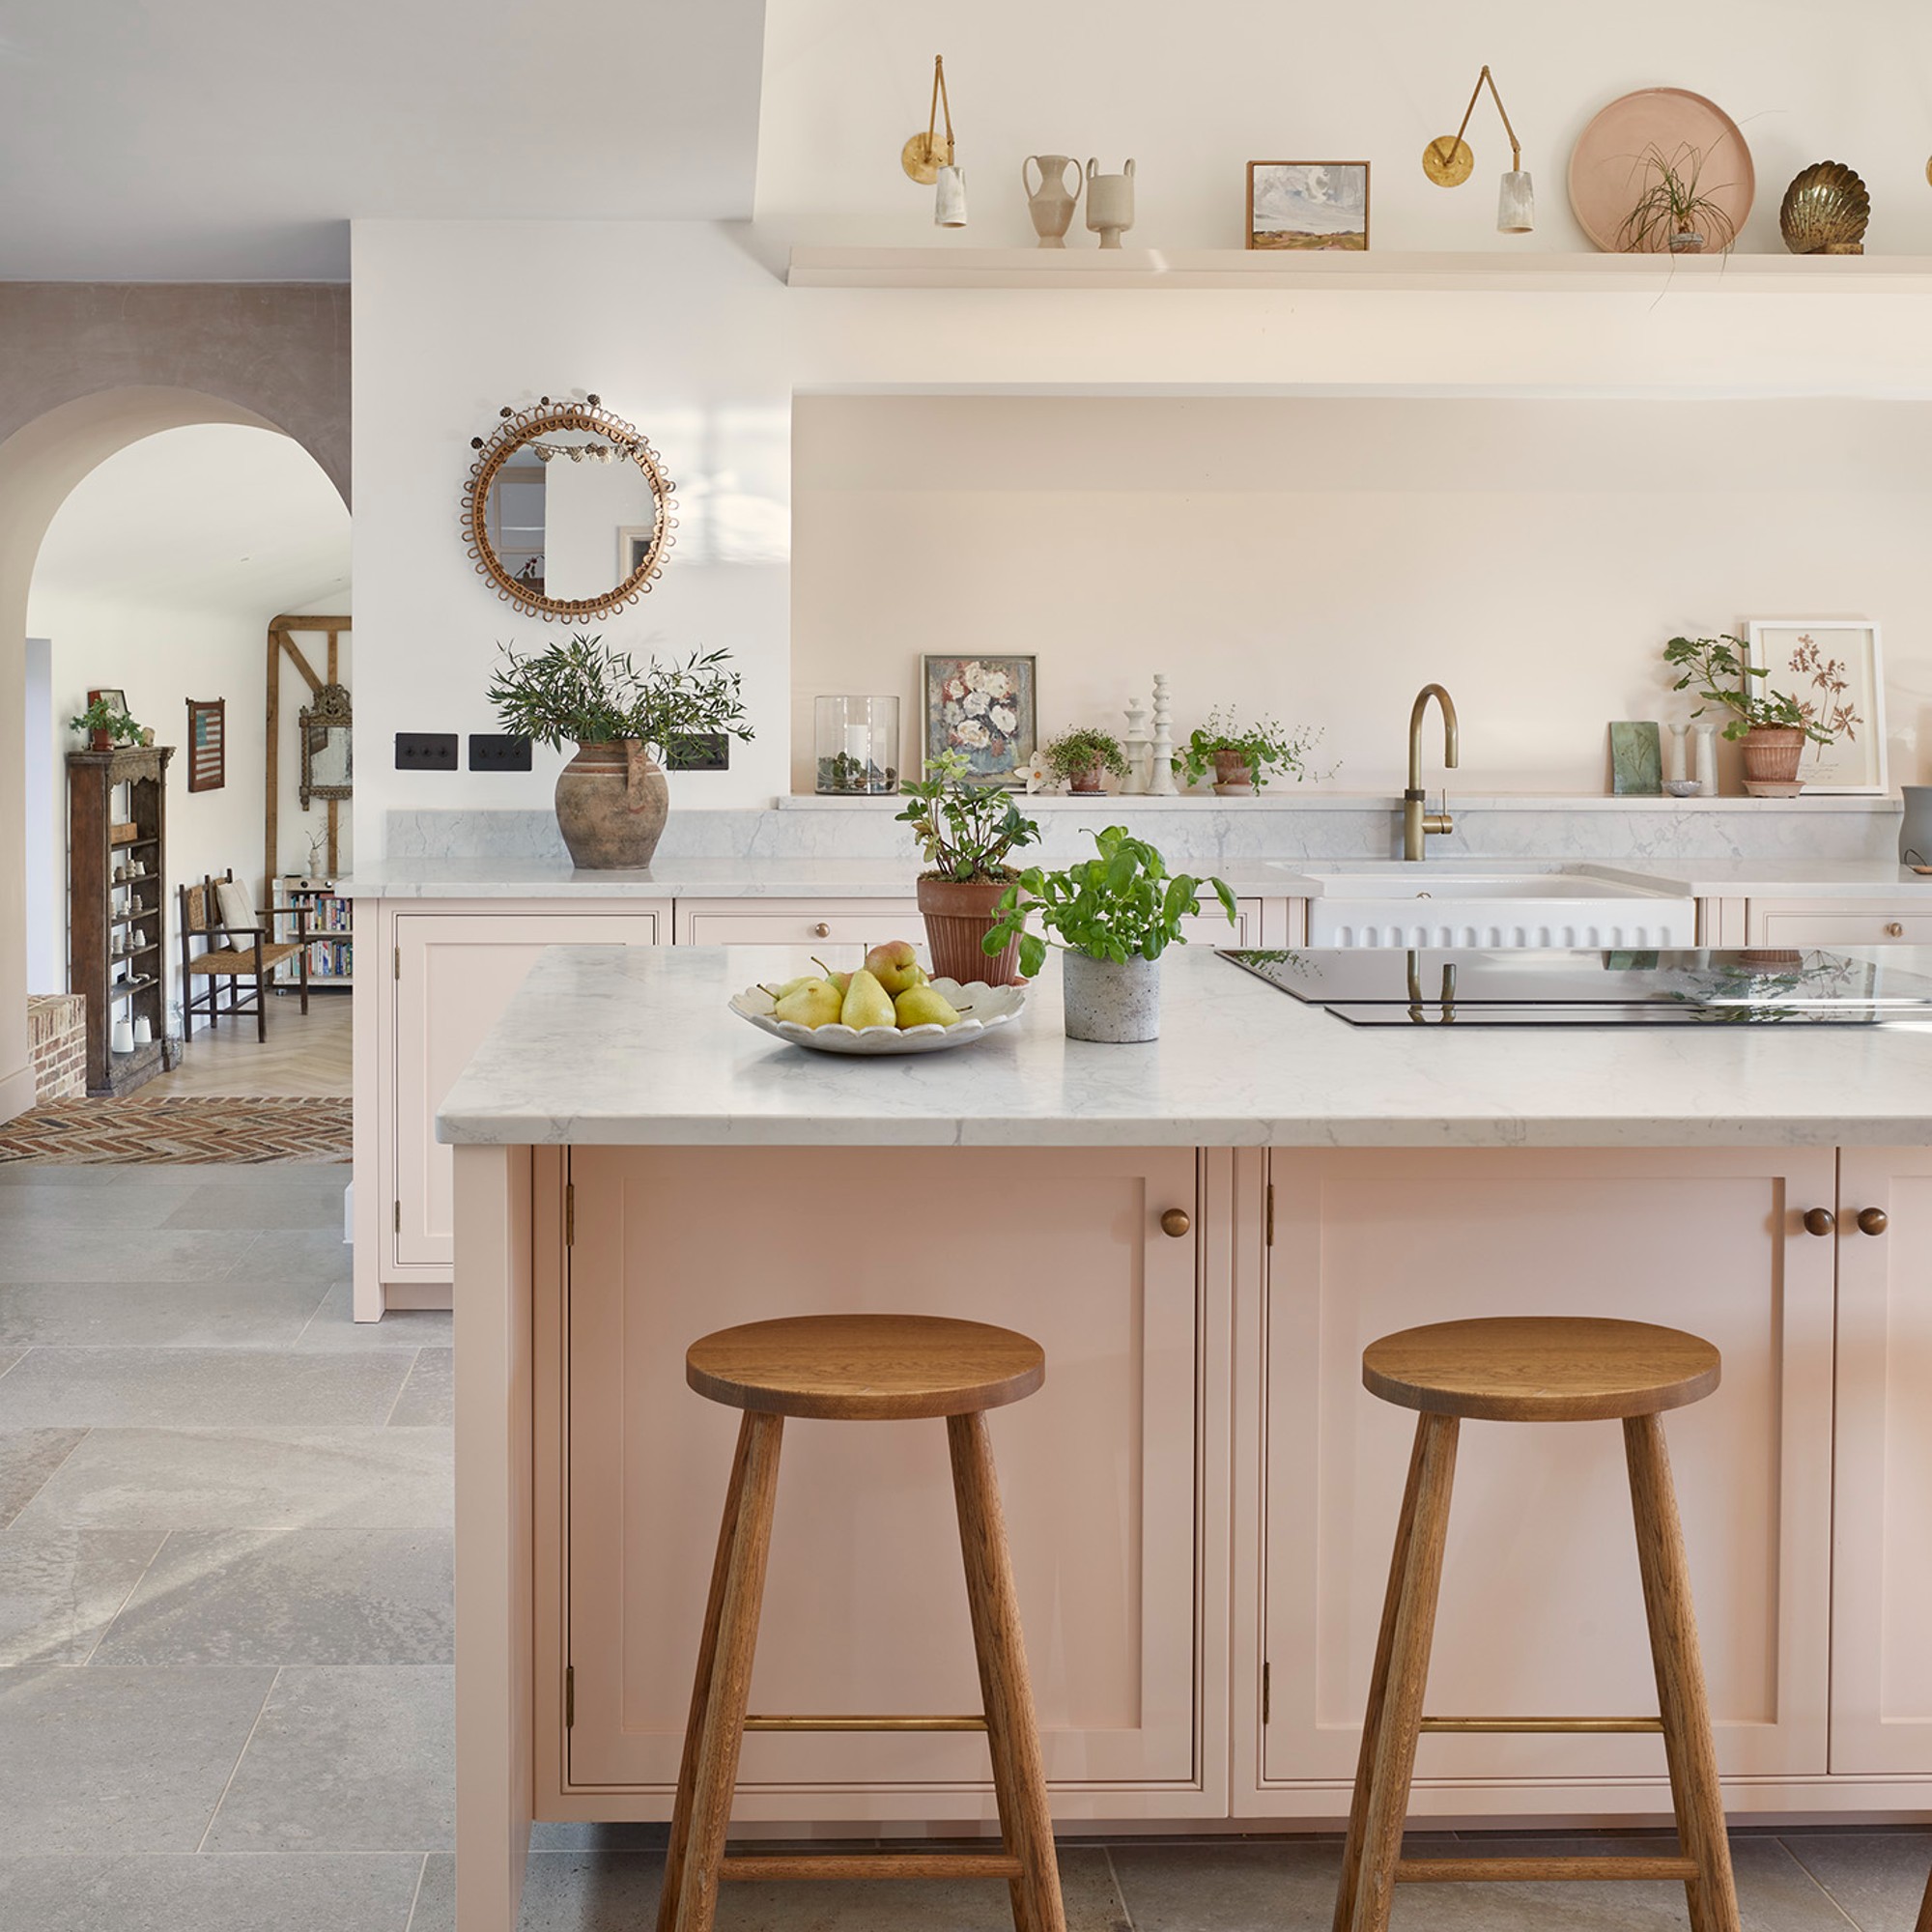 A light pink kitchen with a kitchen island and decorative objects